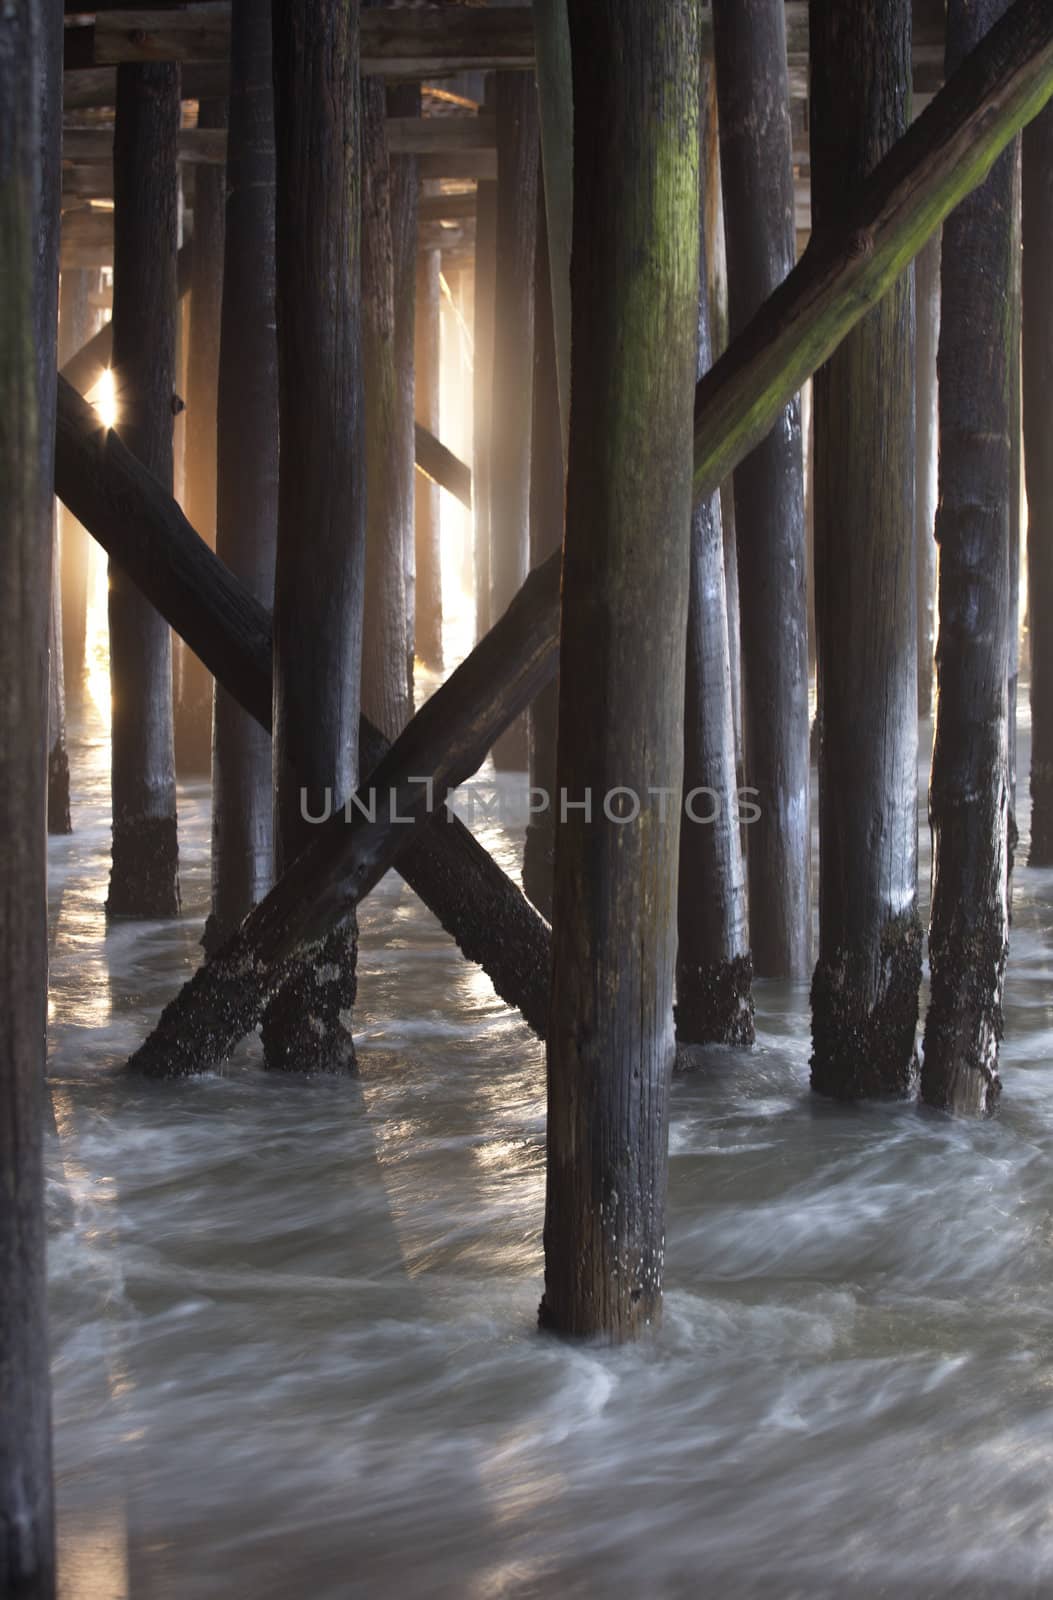 Wooden pilings beneath the pier with flowing tides and morning light visible; location is New Jersey shore, Seaside Heights, Casino Pier.  Motion blur, slow shutter speed used. 